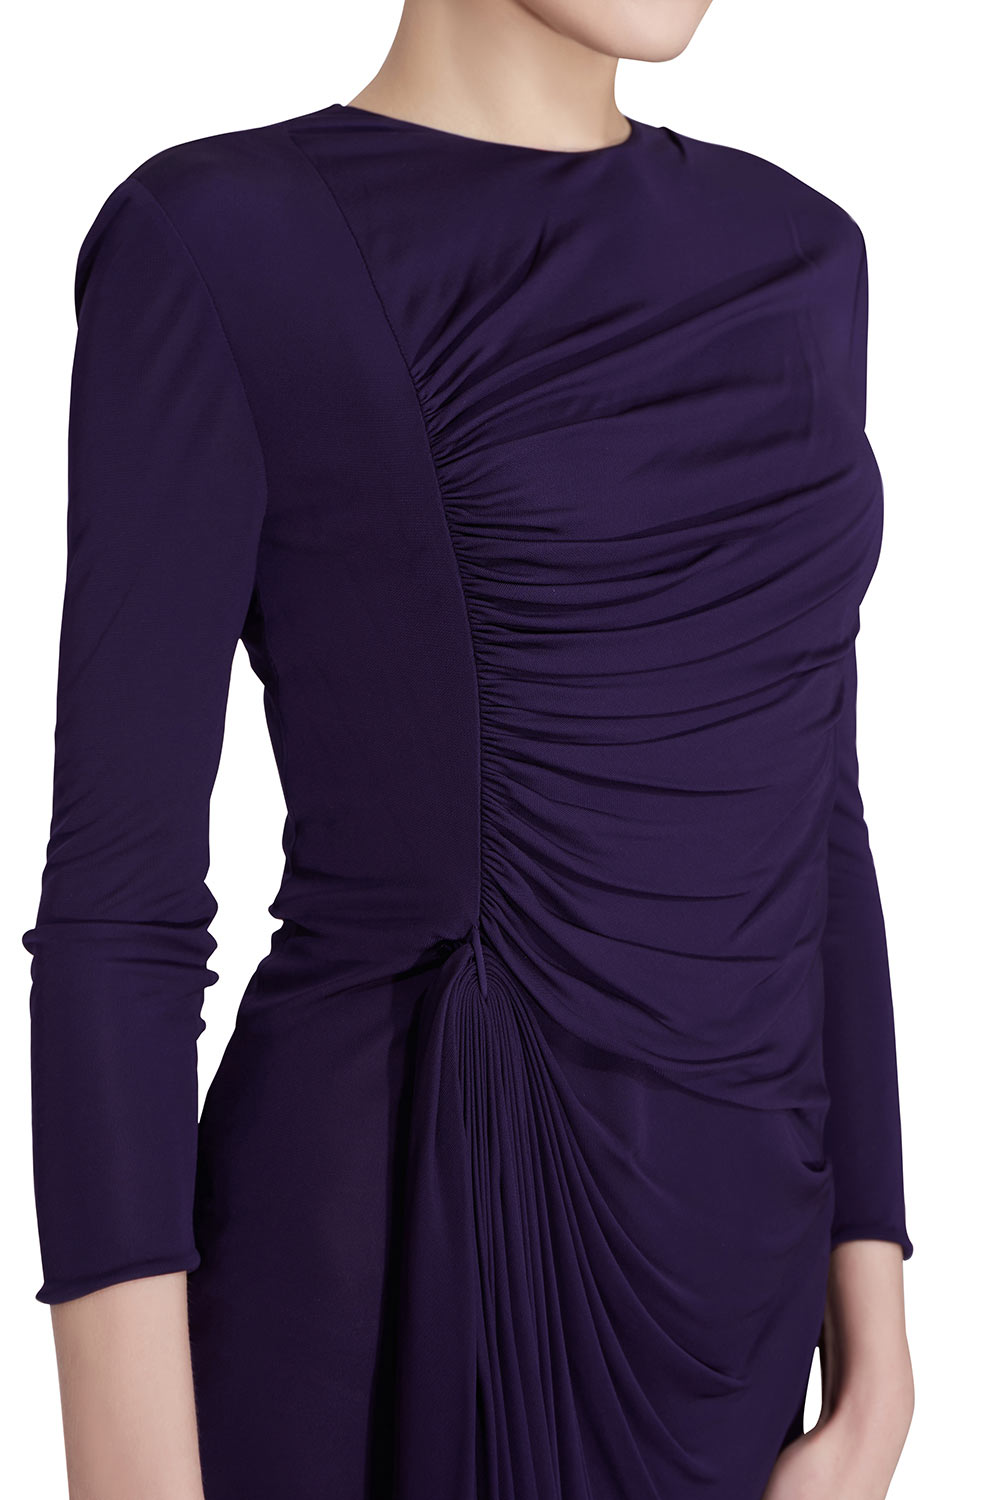 3.1 Phillip Lim Purple Jersey Ruched Front Draped Long Sleeve Dress XS